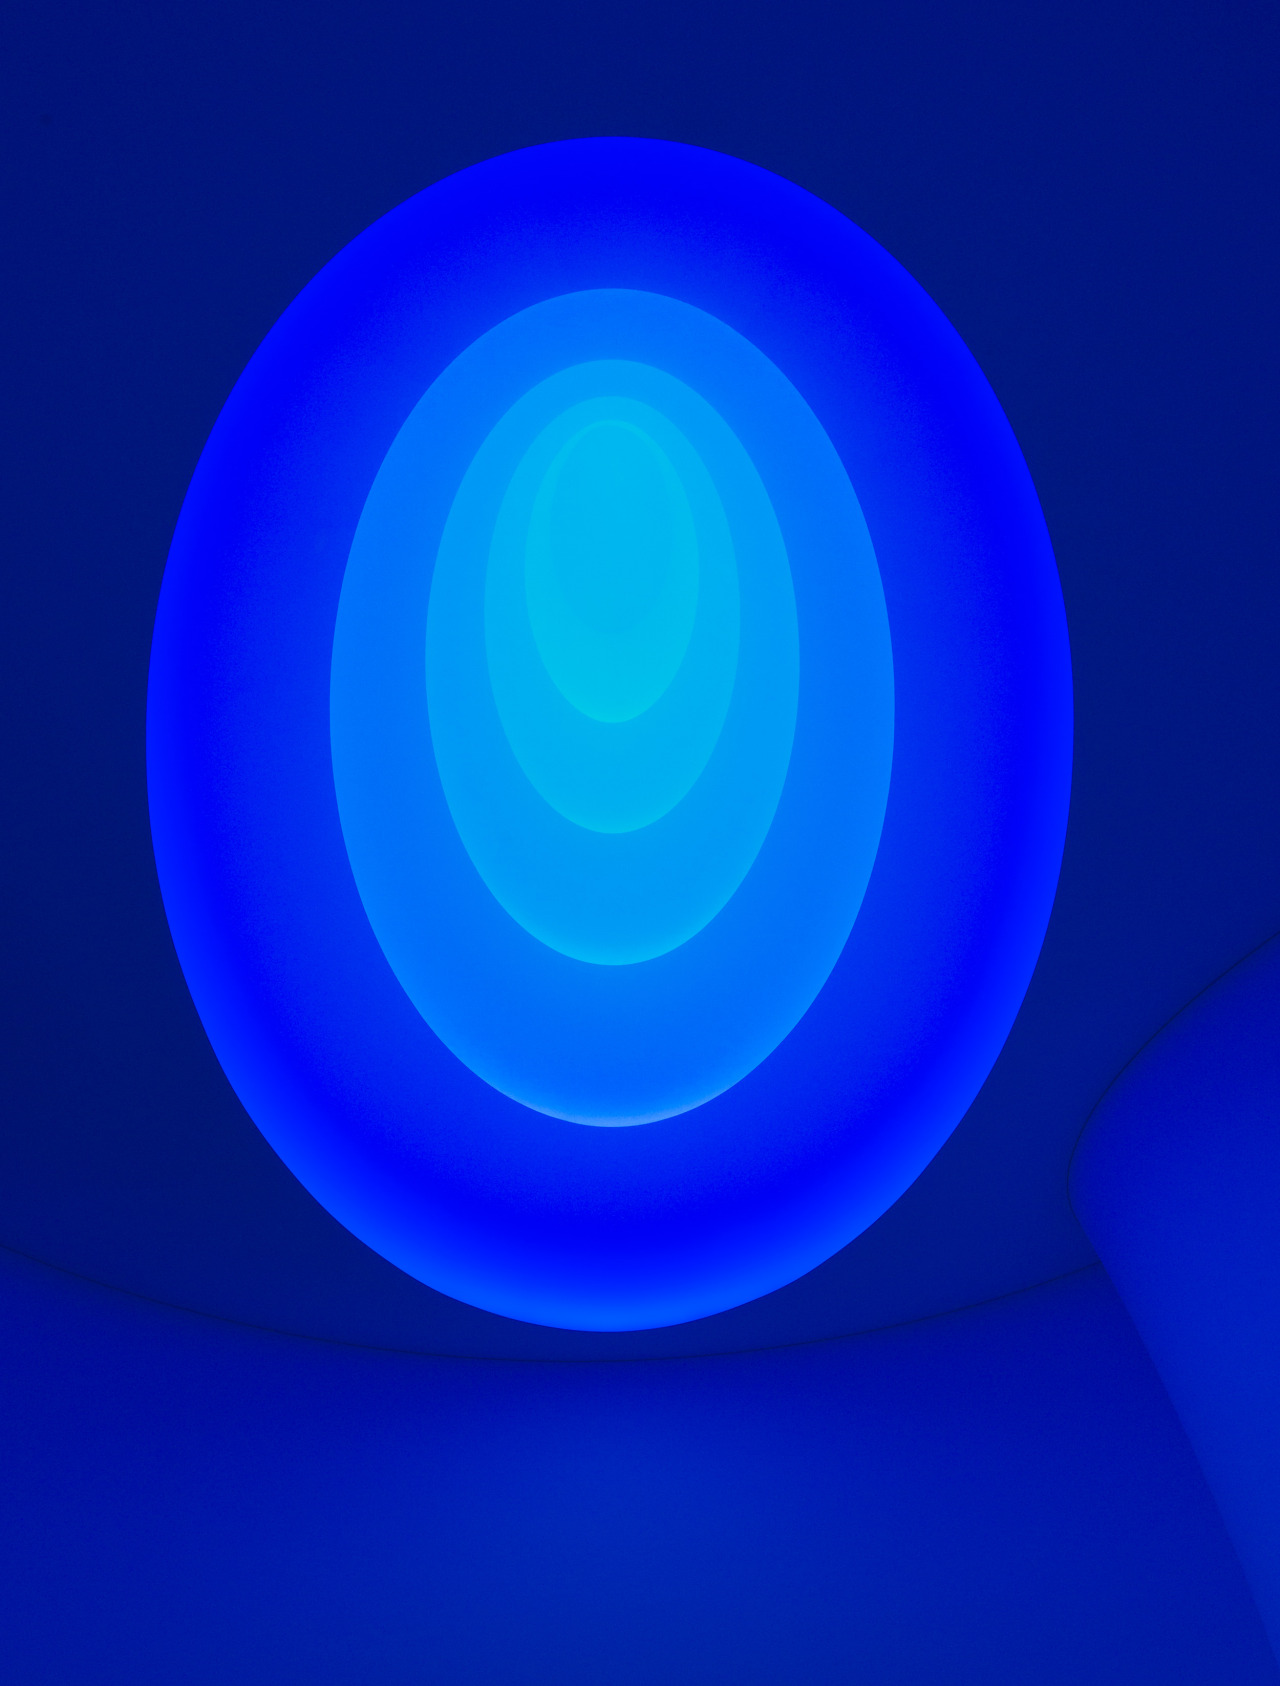 James Turrell at The Guggenheim.